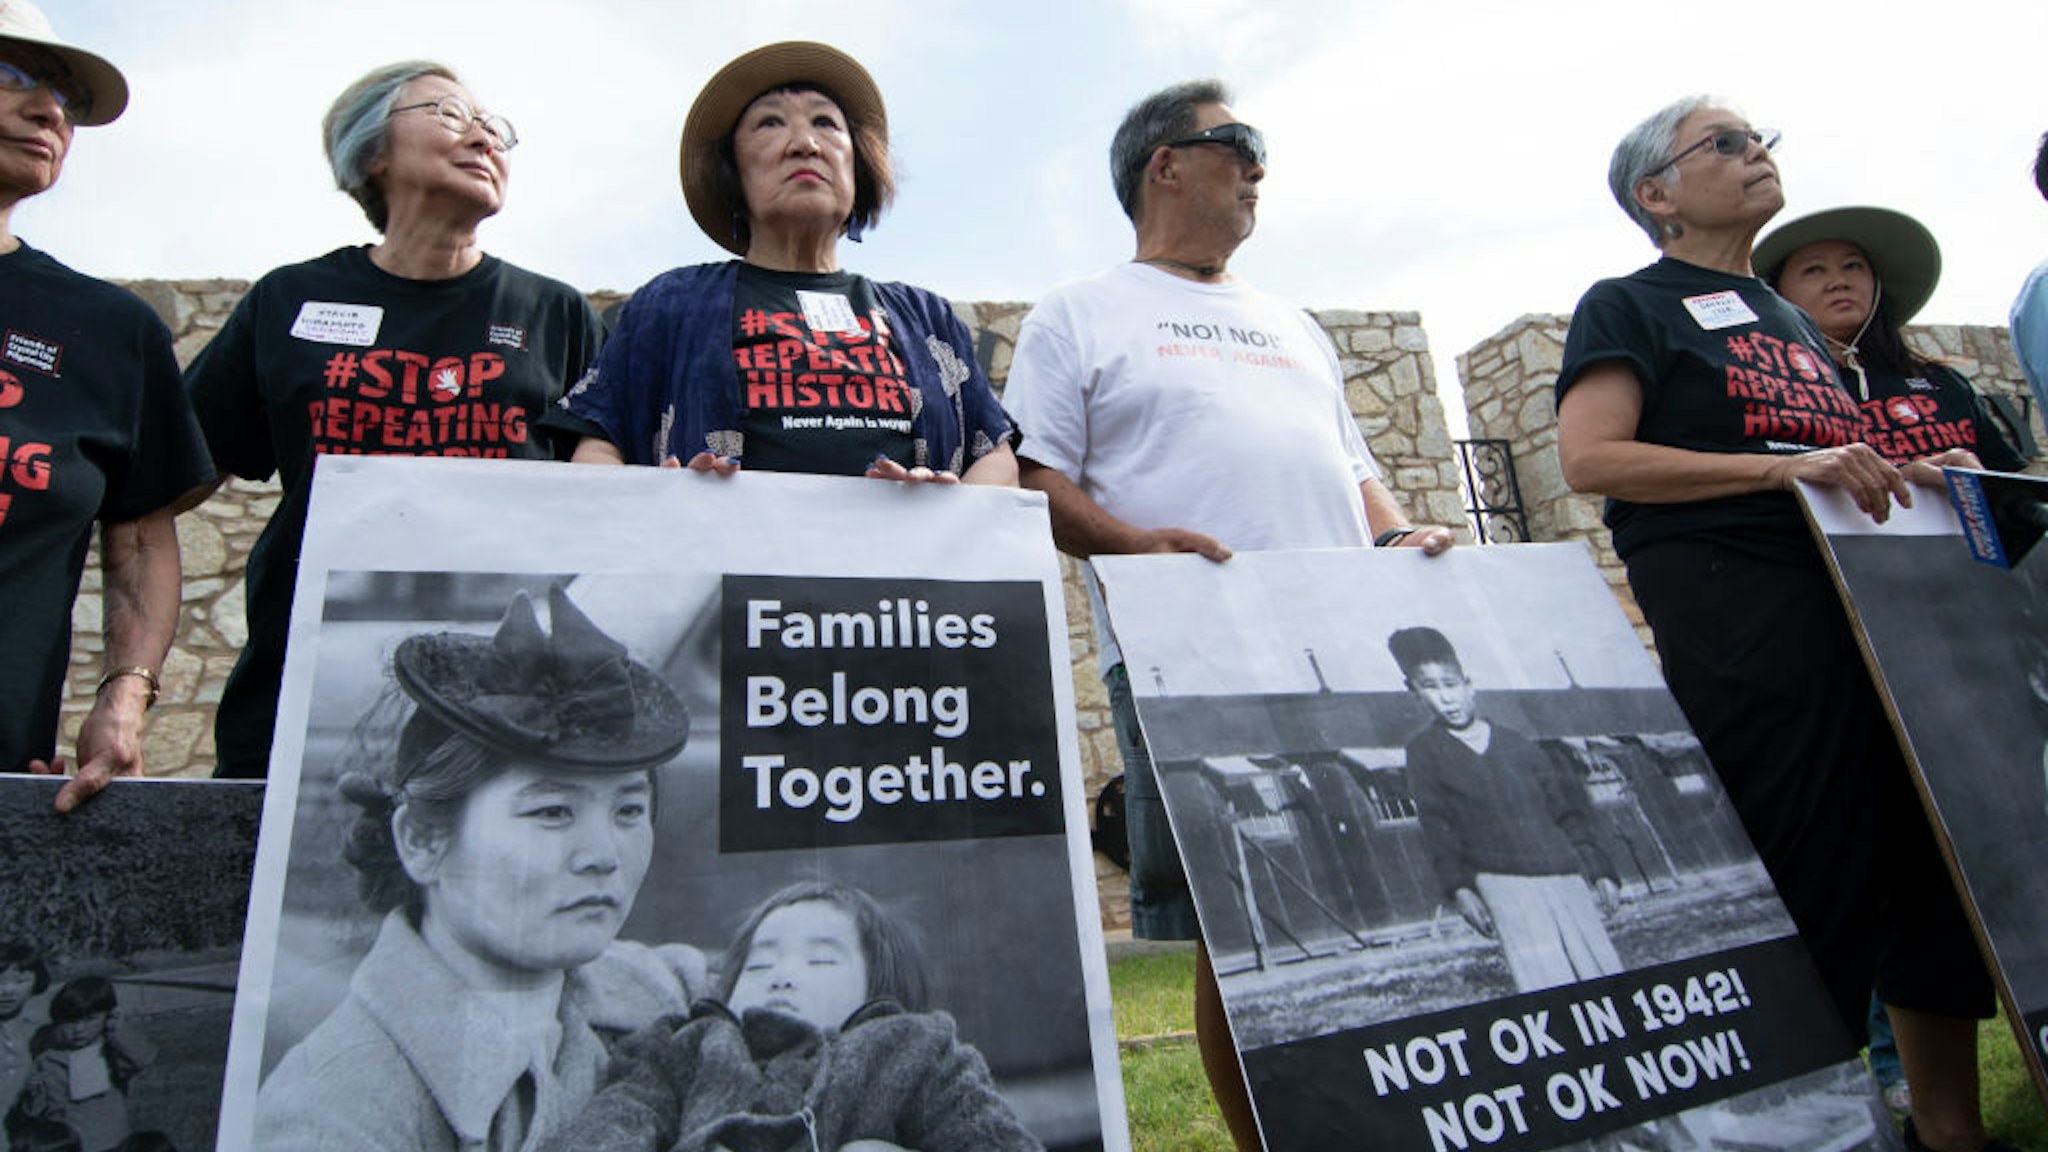 FORT SILL, OK - JUNE 22: Japanese Americans pose with photos of themselves taken while they were in relocation camps in WWII, during a press conference on June 22, 2019 in Lawton, Oklahoma to protest the military base, Fort Sill, being used to house 1,400 migrant children. Fort Still has a history of housing those seeking asylum as well as Japanese Americans were imprisoned during WWII and Native Americans were housed there.